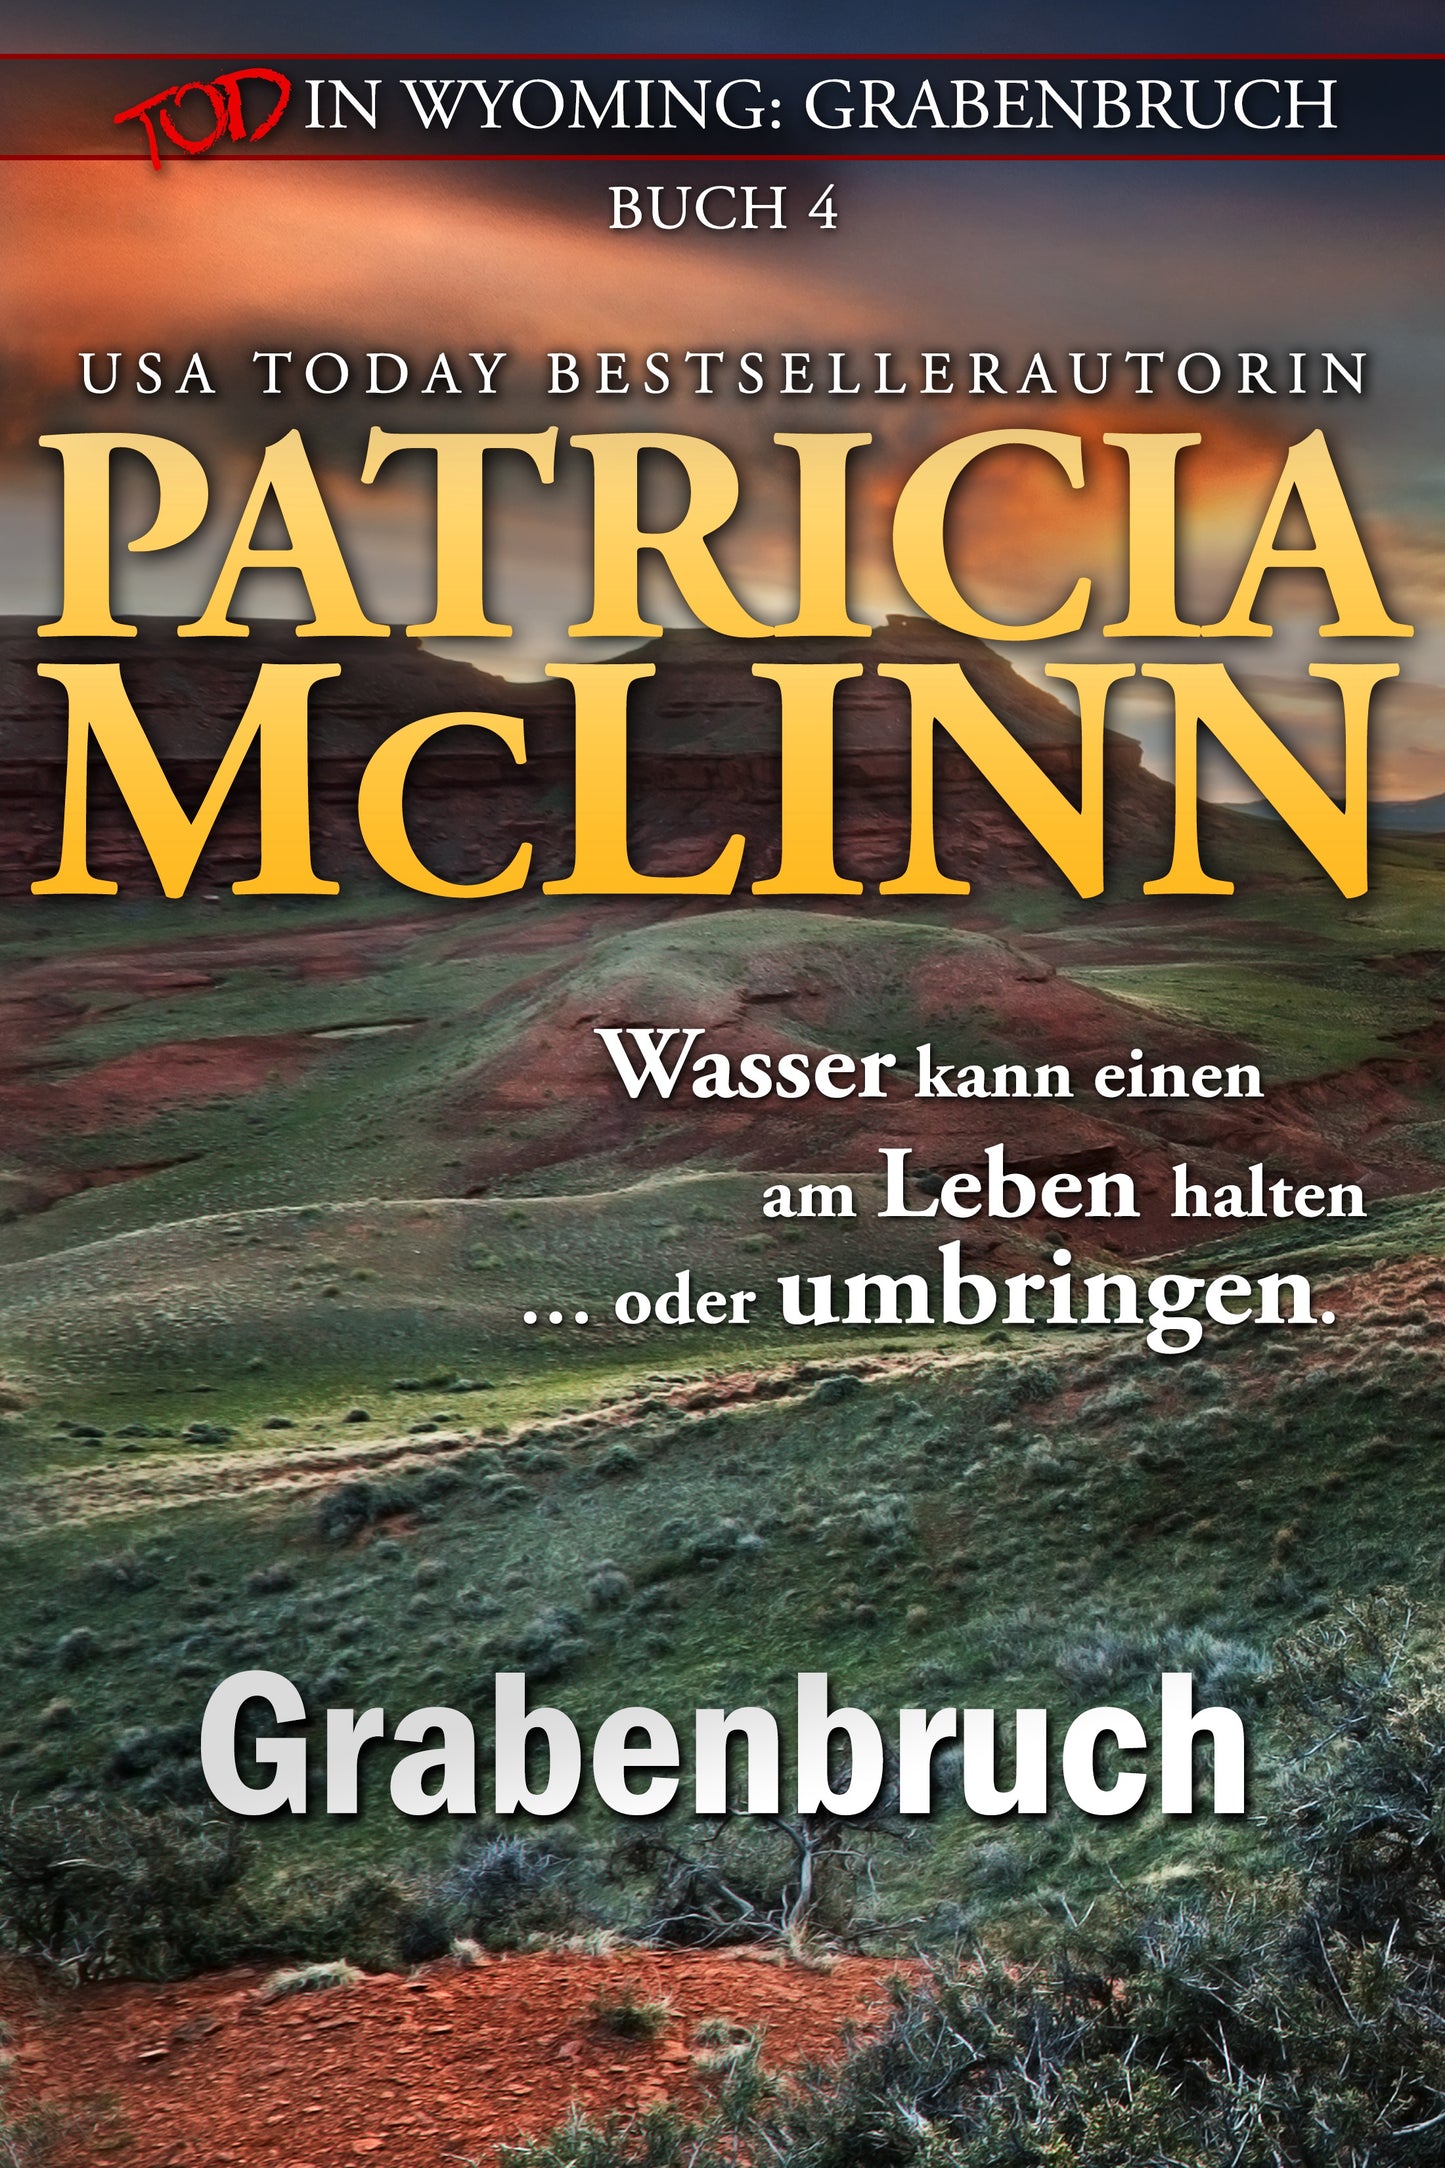 Tod in Wyoming: Grabenbruch - Patricia McLinn